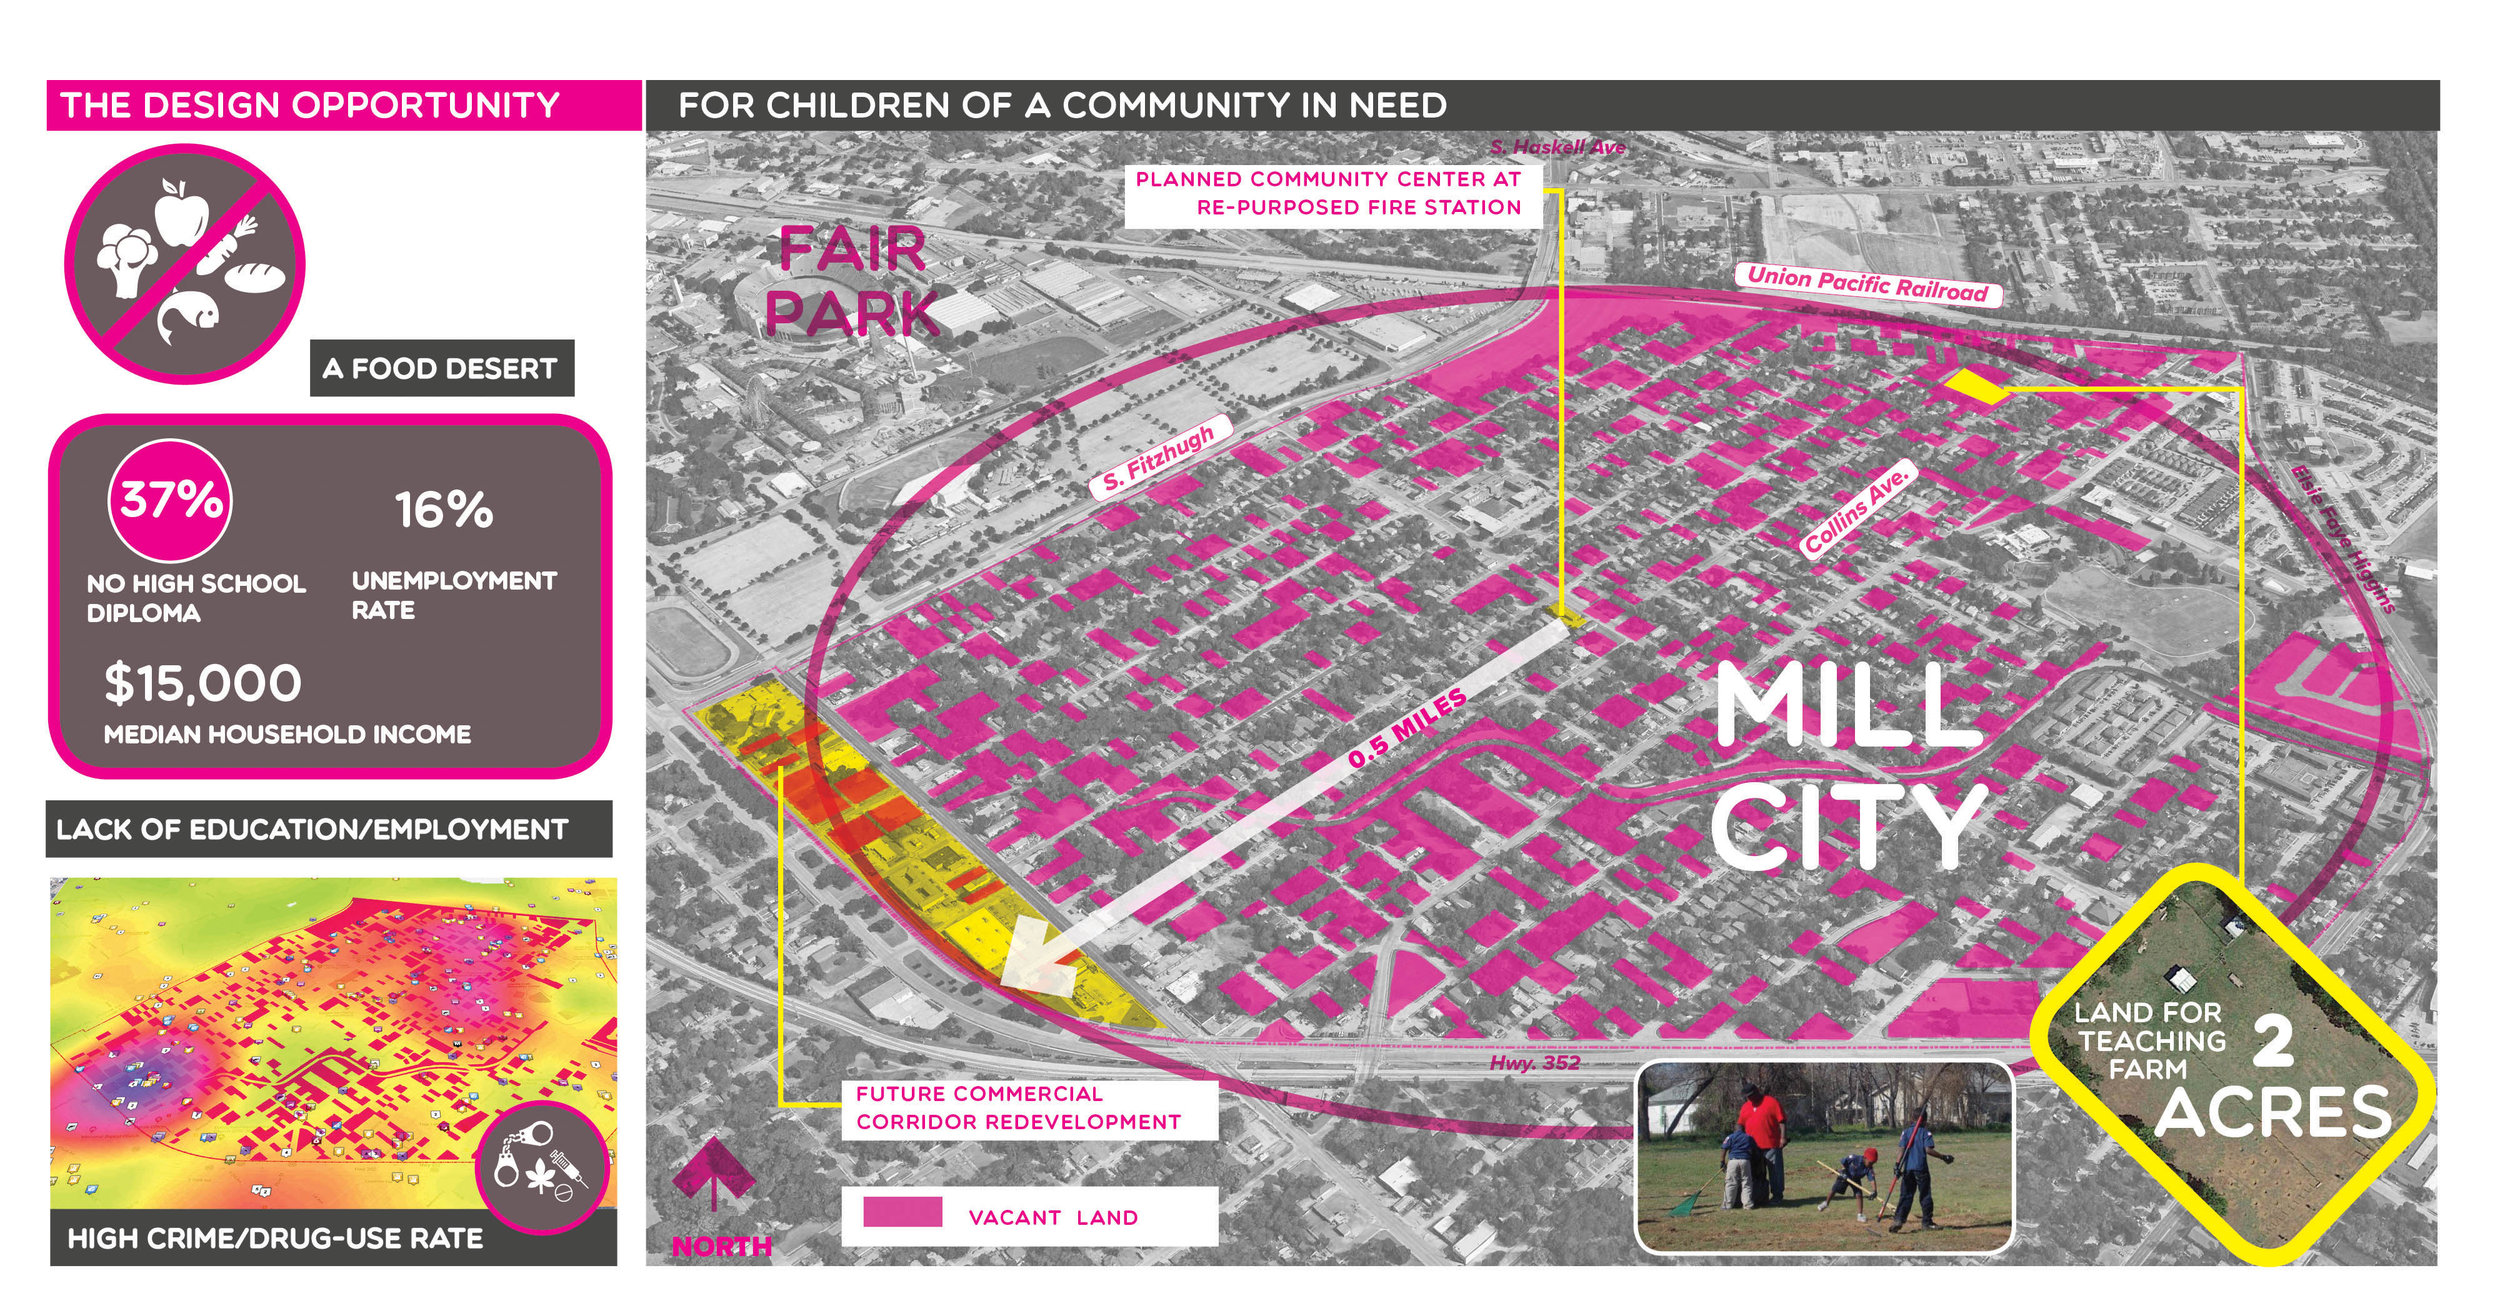  Mill City is an urban community located in Southeast Dallas. Mill City is an under-served, low-income community in what is called a "food desert" area. In the past, drugs and crime have taken over and causing businesses to relocate and the area has 